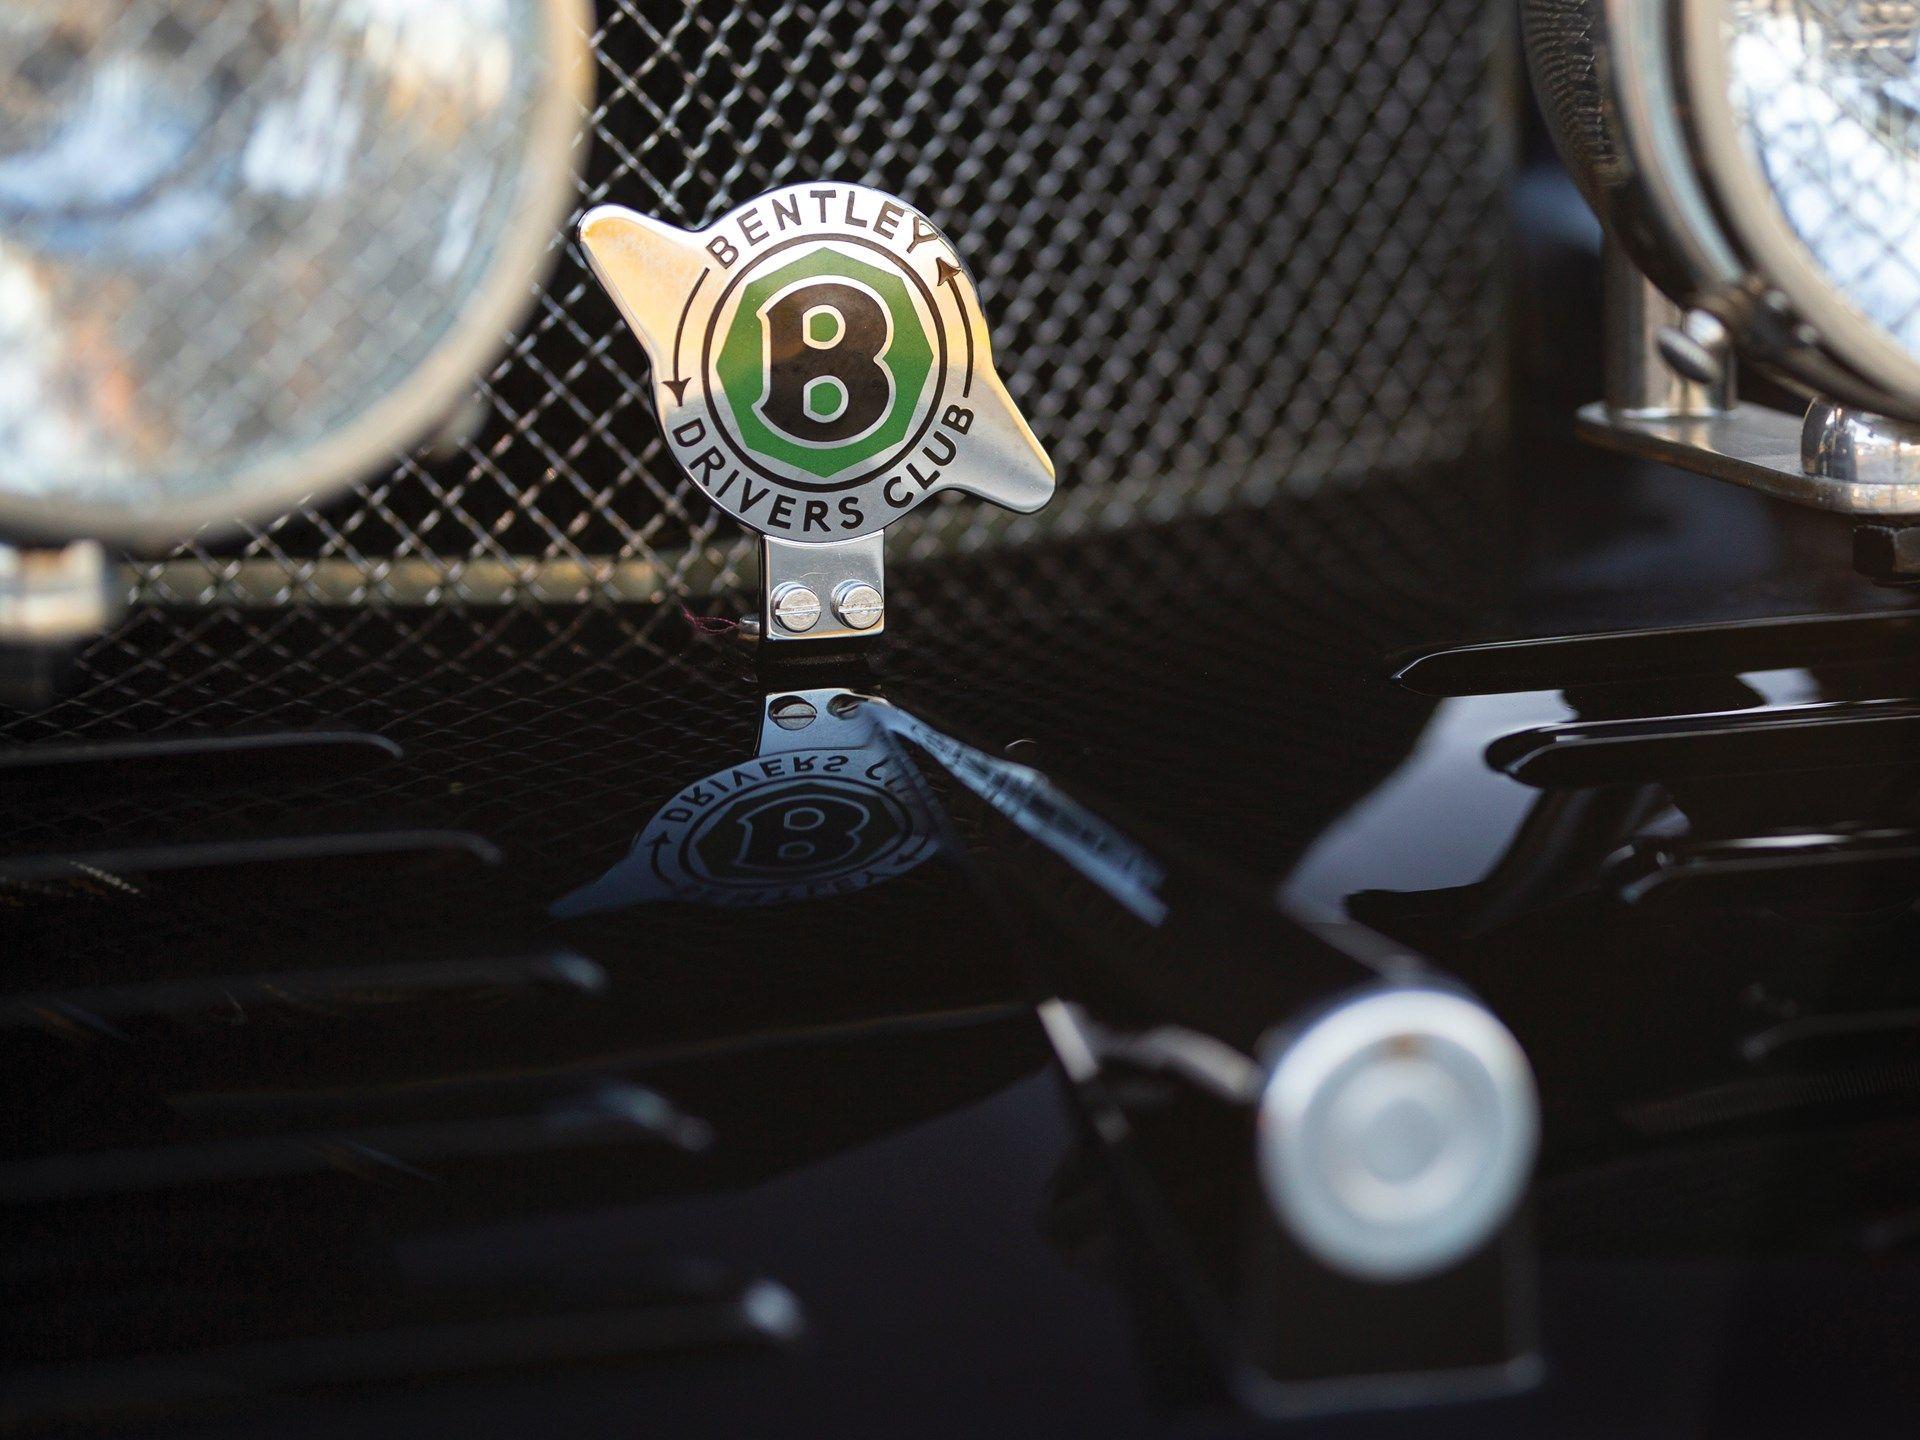 Blue and Green Train Logo - RM Sotheby's - 1953 Bentley 